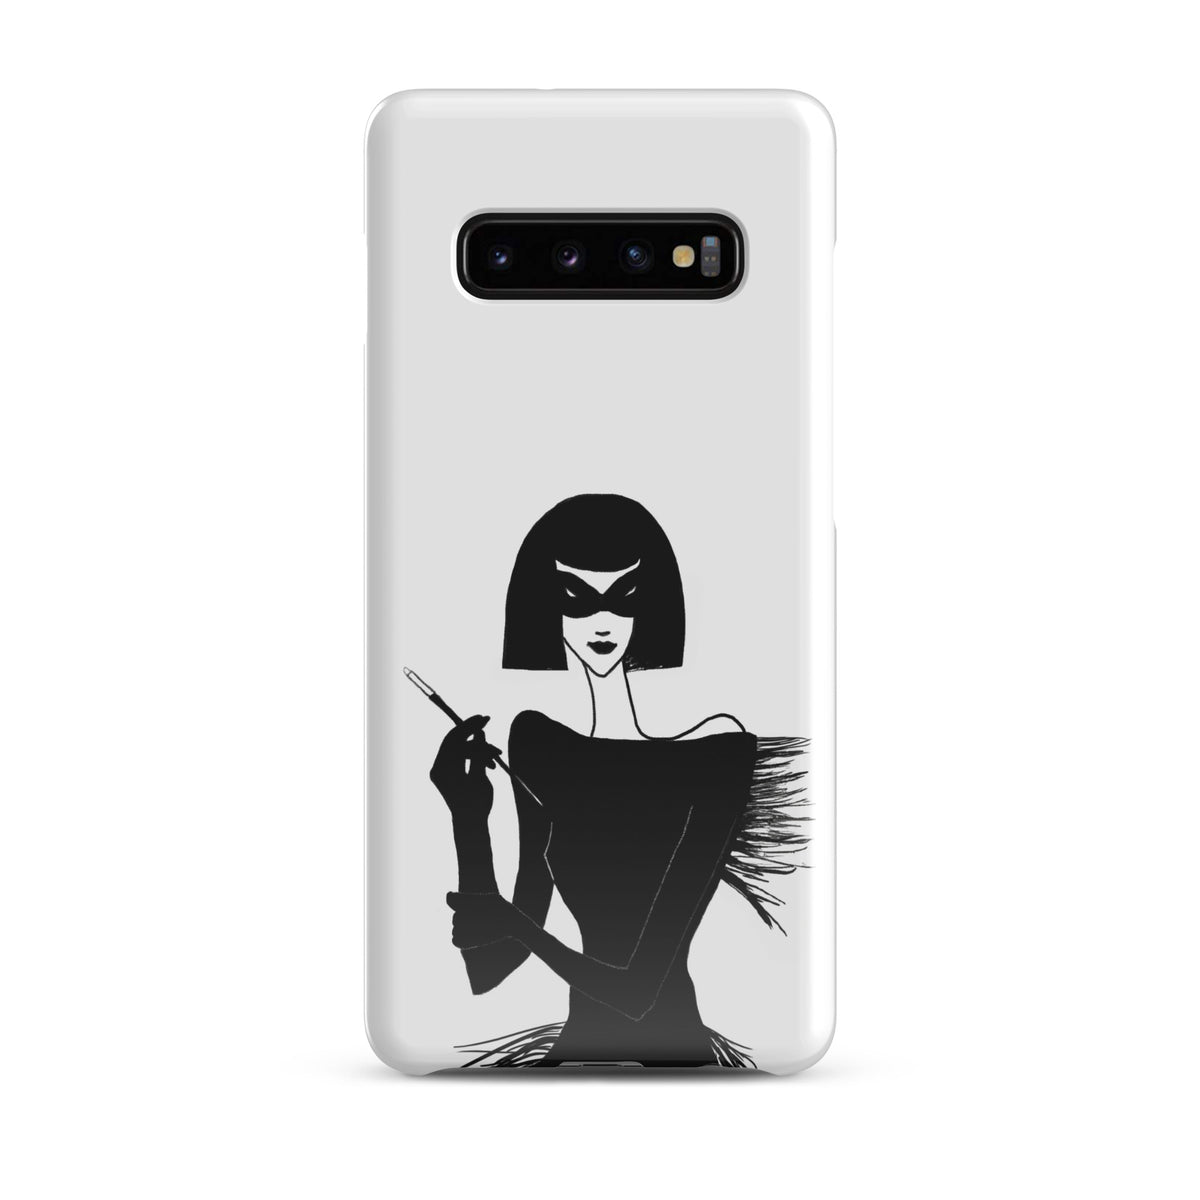 Samsung Phone case with an ink drawing of a 1920's woman in a mask and holding a long cigarette